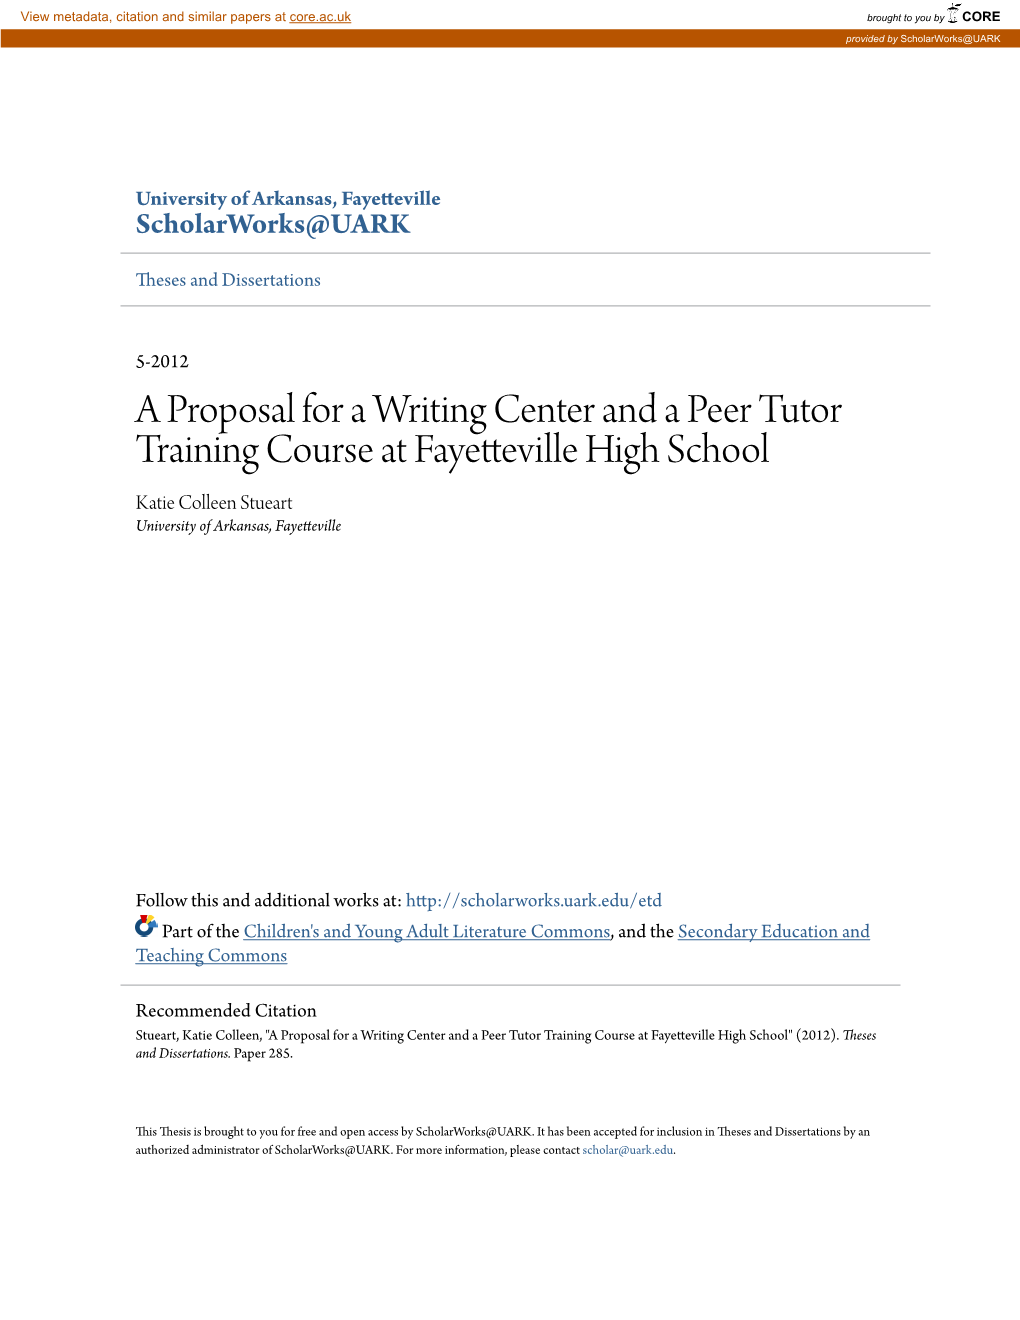 A Proposal for a Writing Center and a Peer Tutor Training Course at Fayetteville High School Katie Colleen Stueart University of Arkansas, Fayetteville